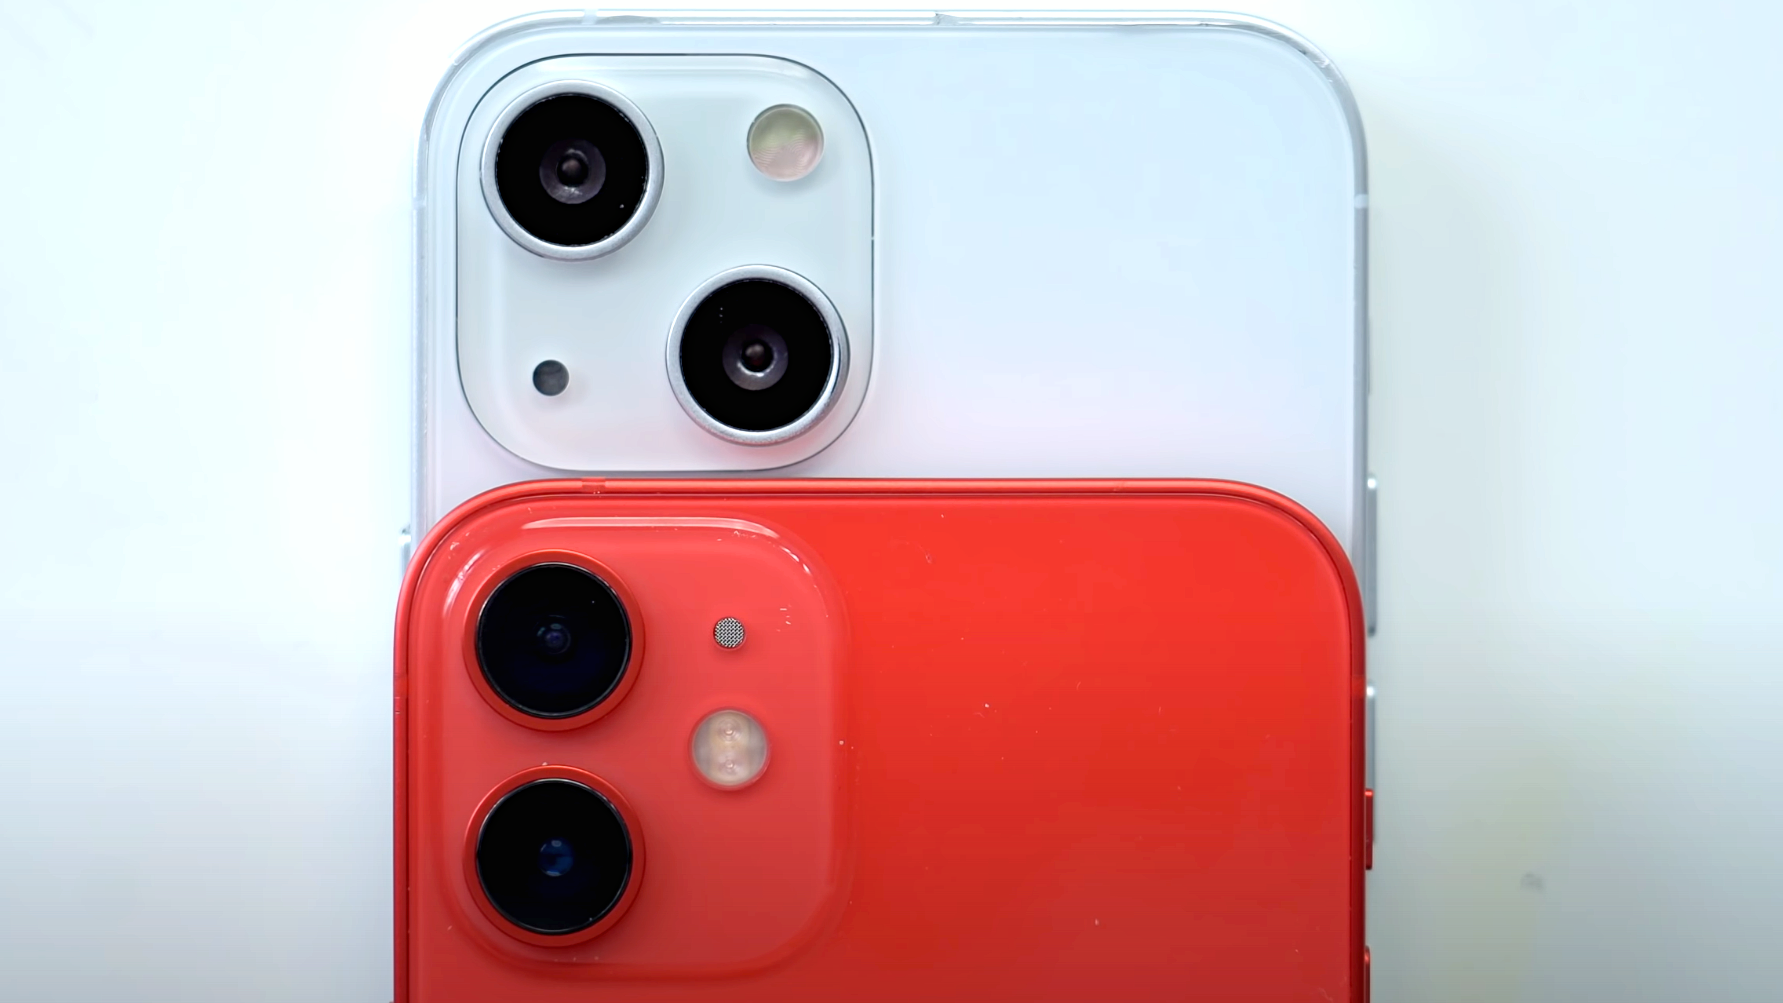 iPhone 12 vs iPhone 13 - the cameras are moving around, but why? Image courtesy of MacRumors. - Flaregate: Will iPhone 13 fix the biggest iPhone 12 camera problem?